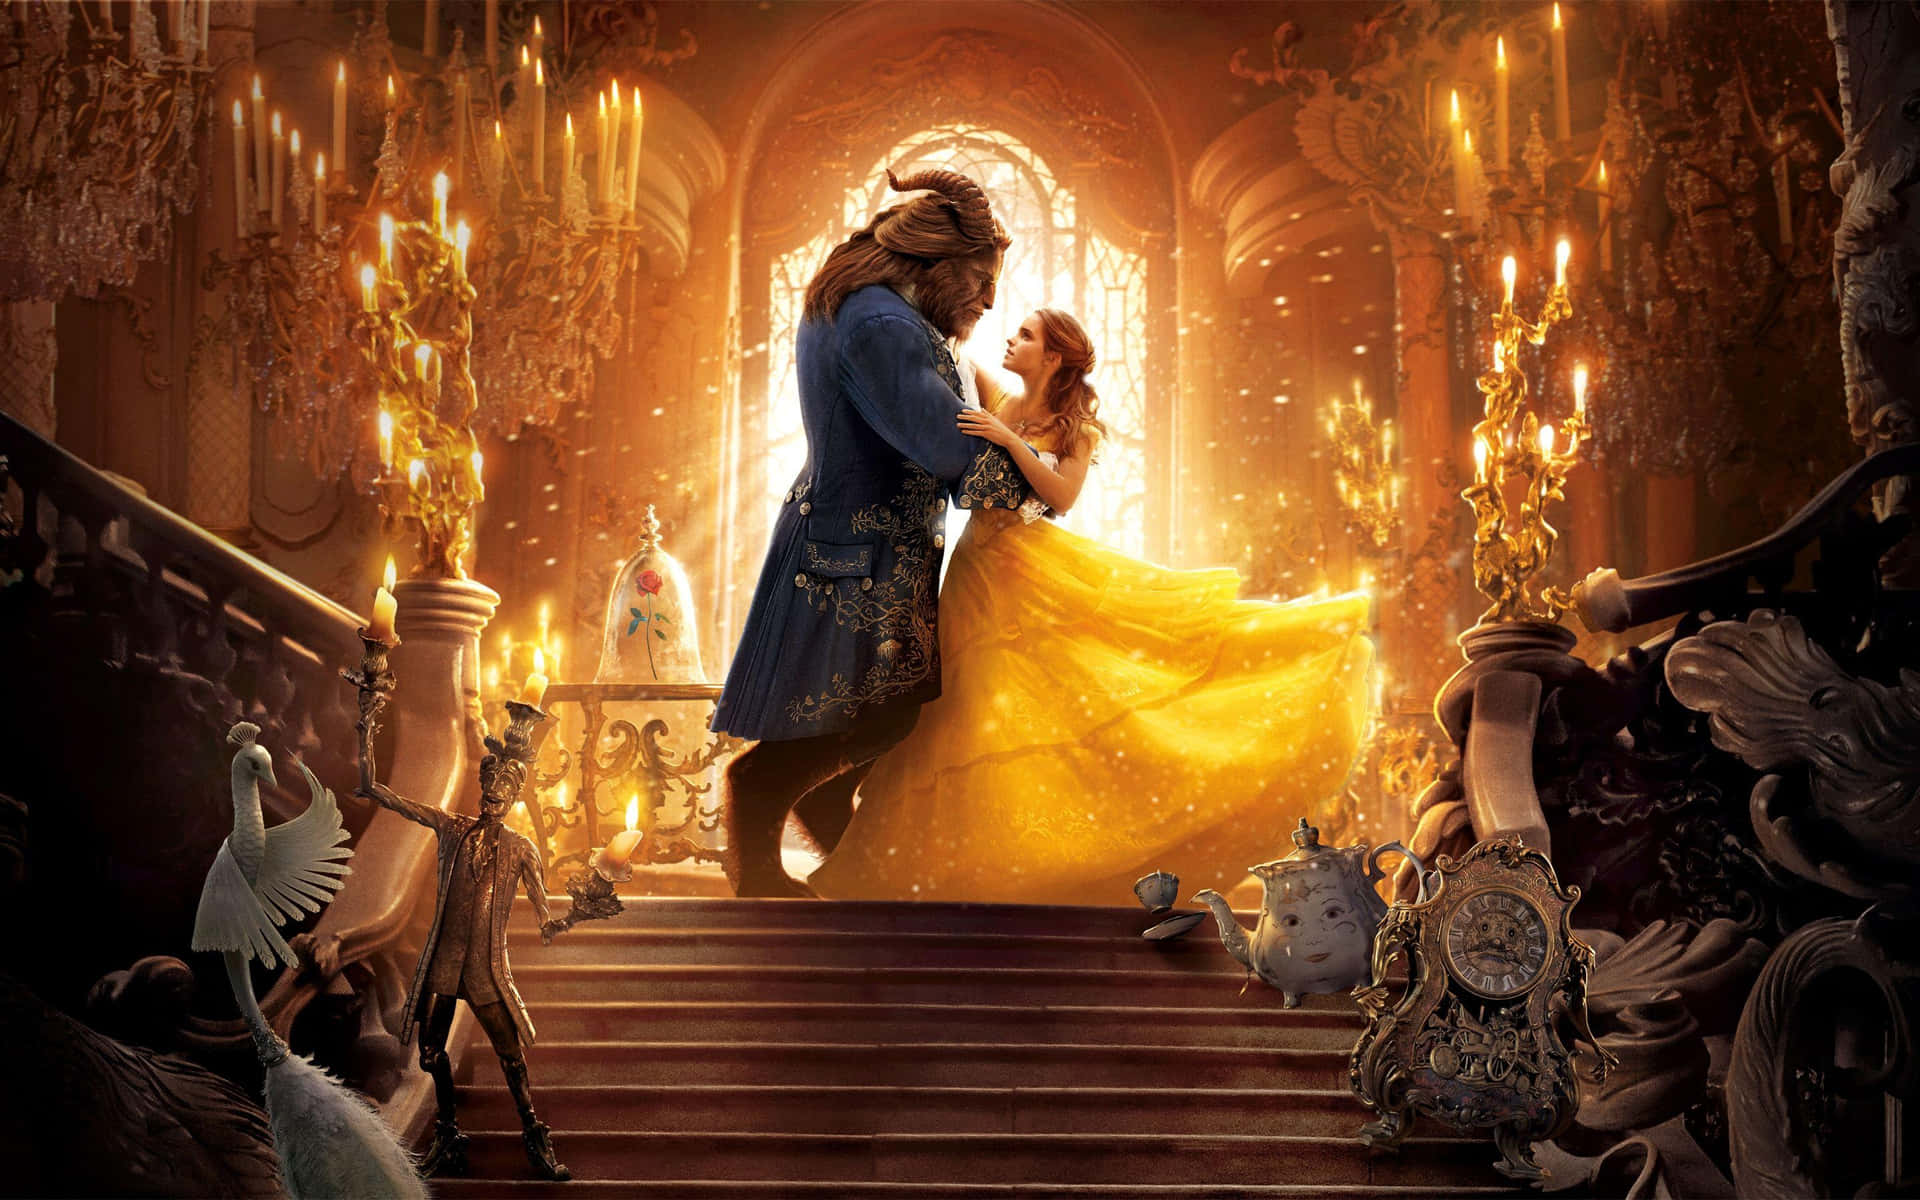 Beauty And The Beast Movie Poster